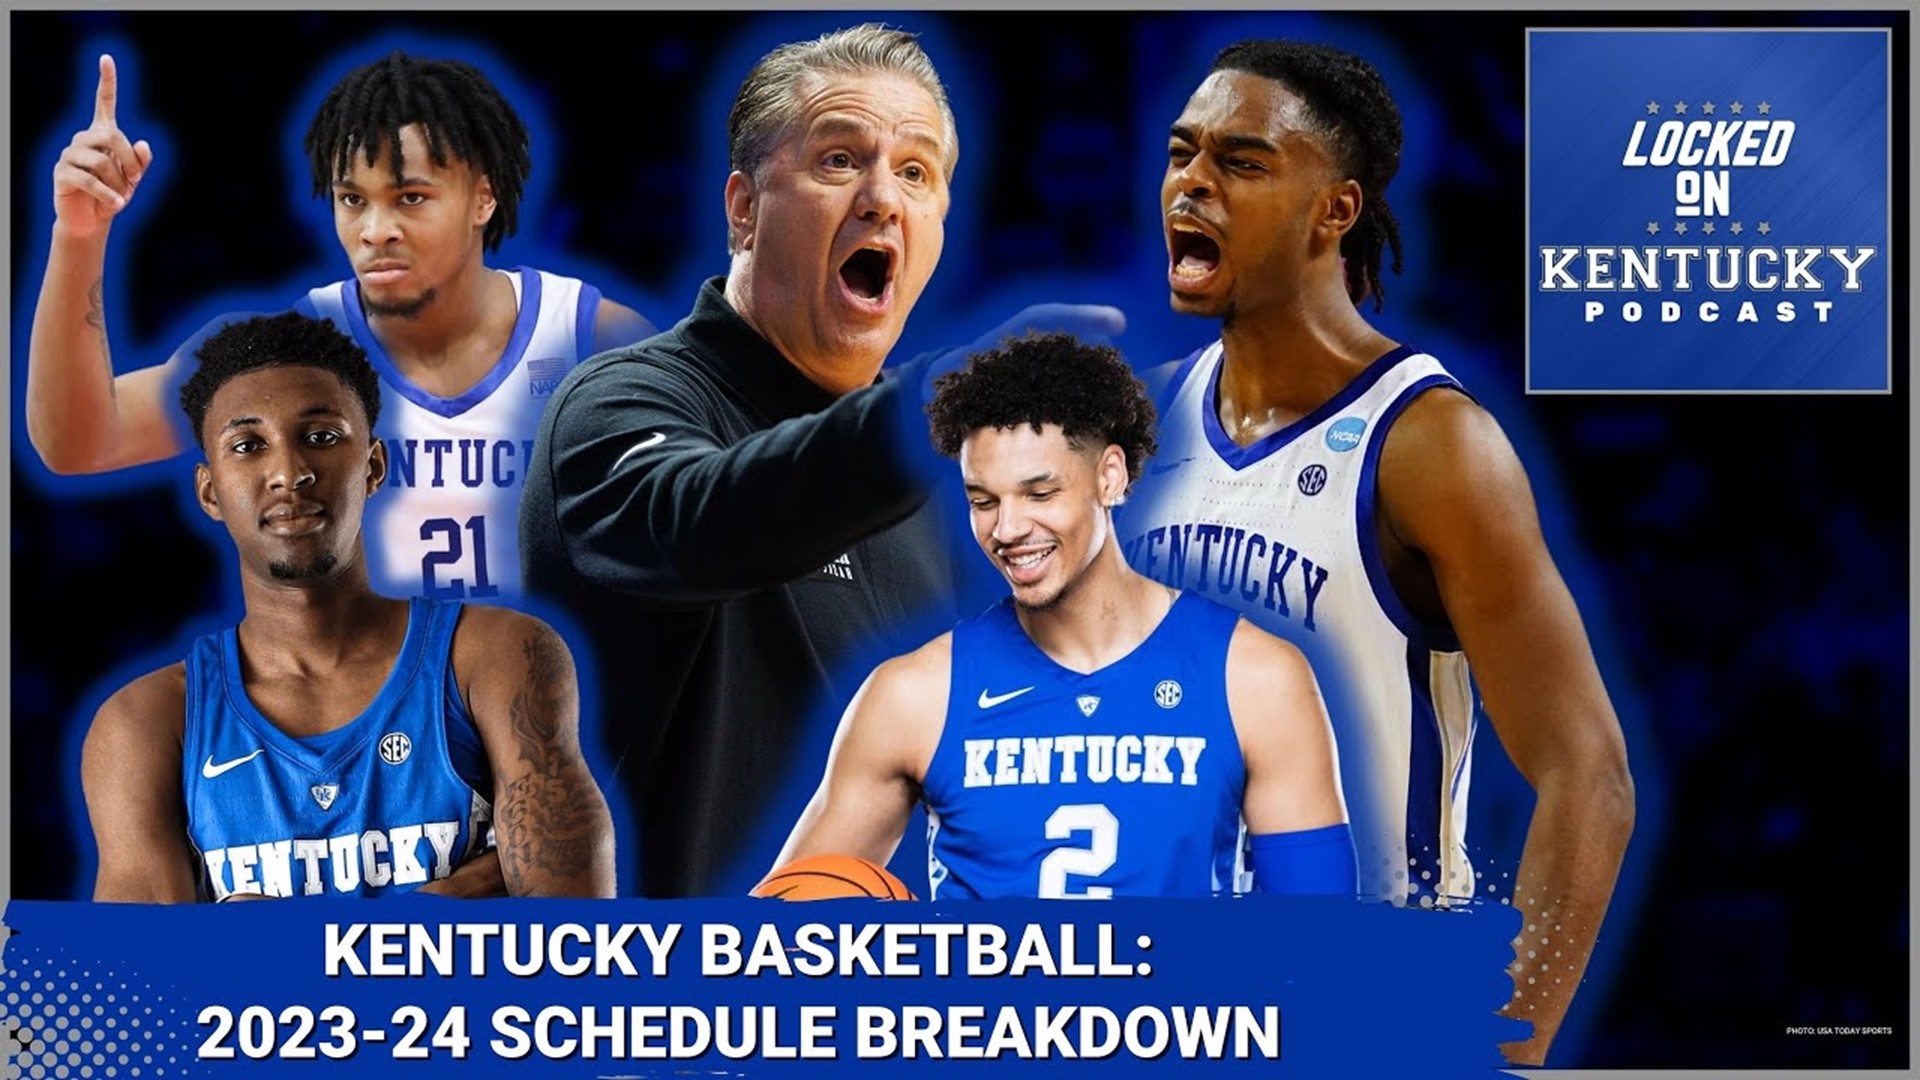 Kentucky basketball's 2023-24 schedule is here. It's tough, but if all goes well for John Calipari's squad, the Wildcats could have a special year.